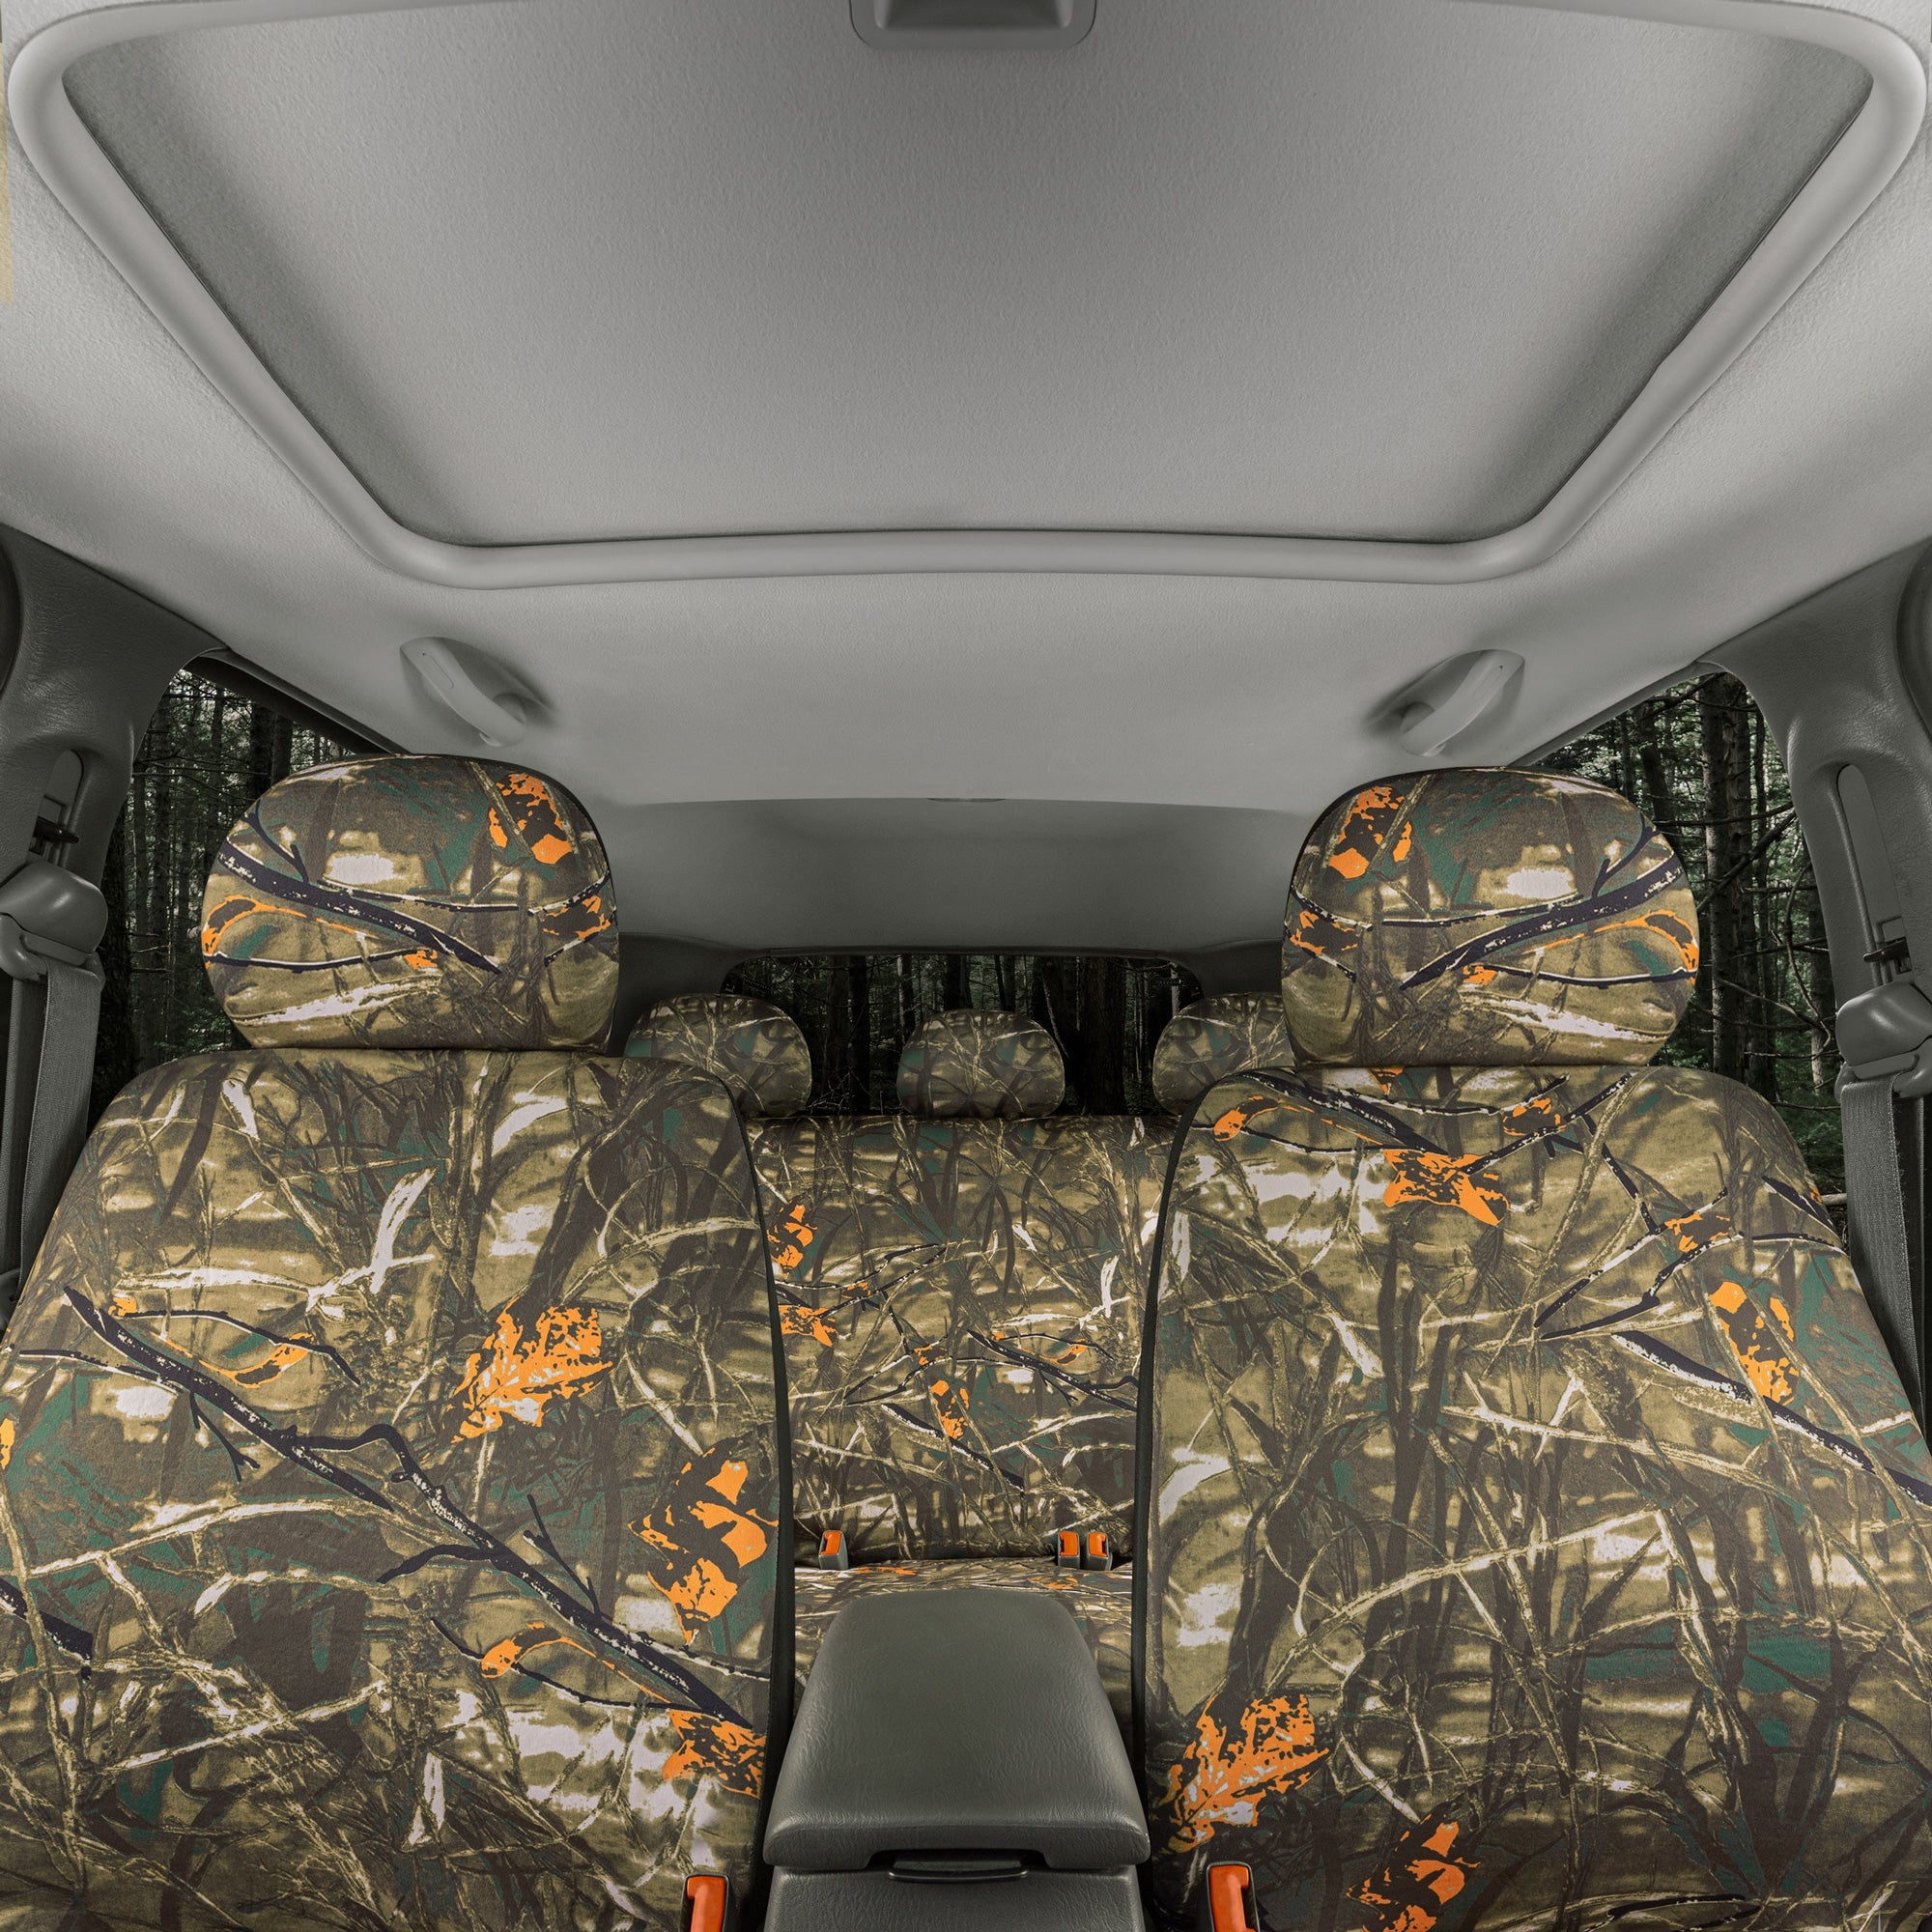 BDK Hunter Camo Car Seat Covers Full Set with Steering Wheel Cover and Seat Belt Pads – Real Mossy Tree Oak Forest Camouflage Pattern, Automotive Front & Bench Back Seat Cover for Cars Trucks SUV